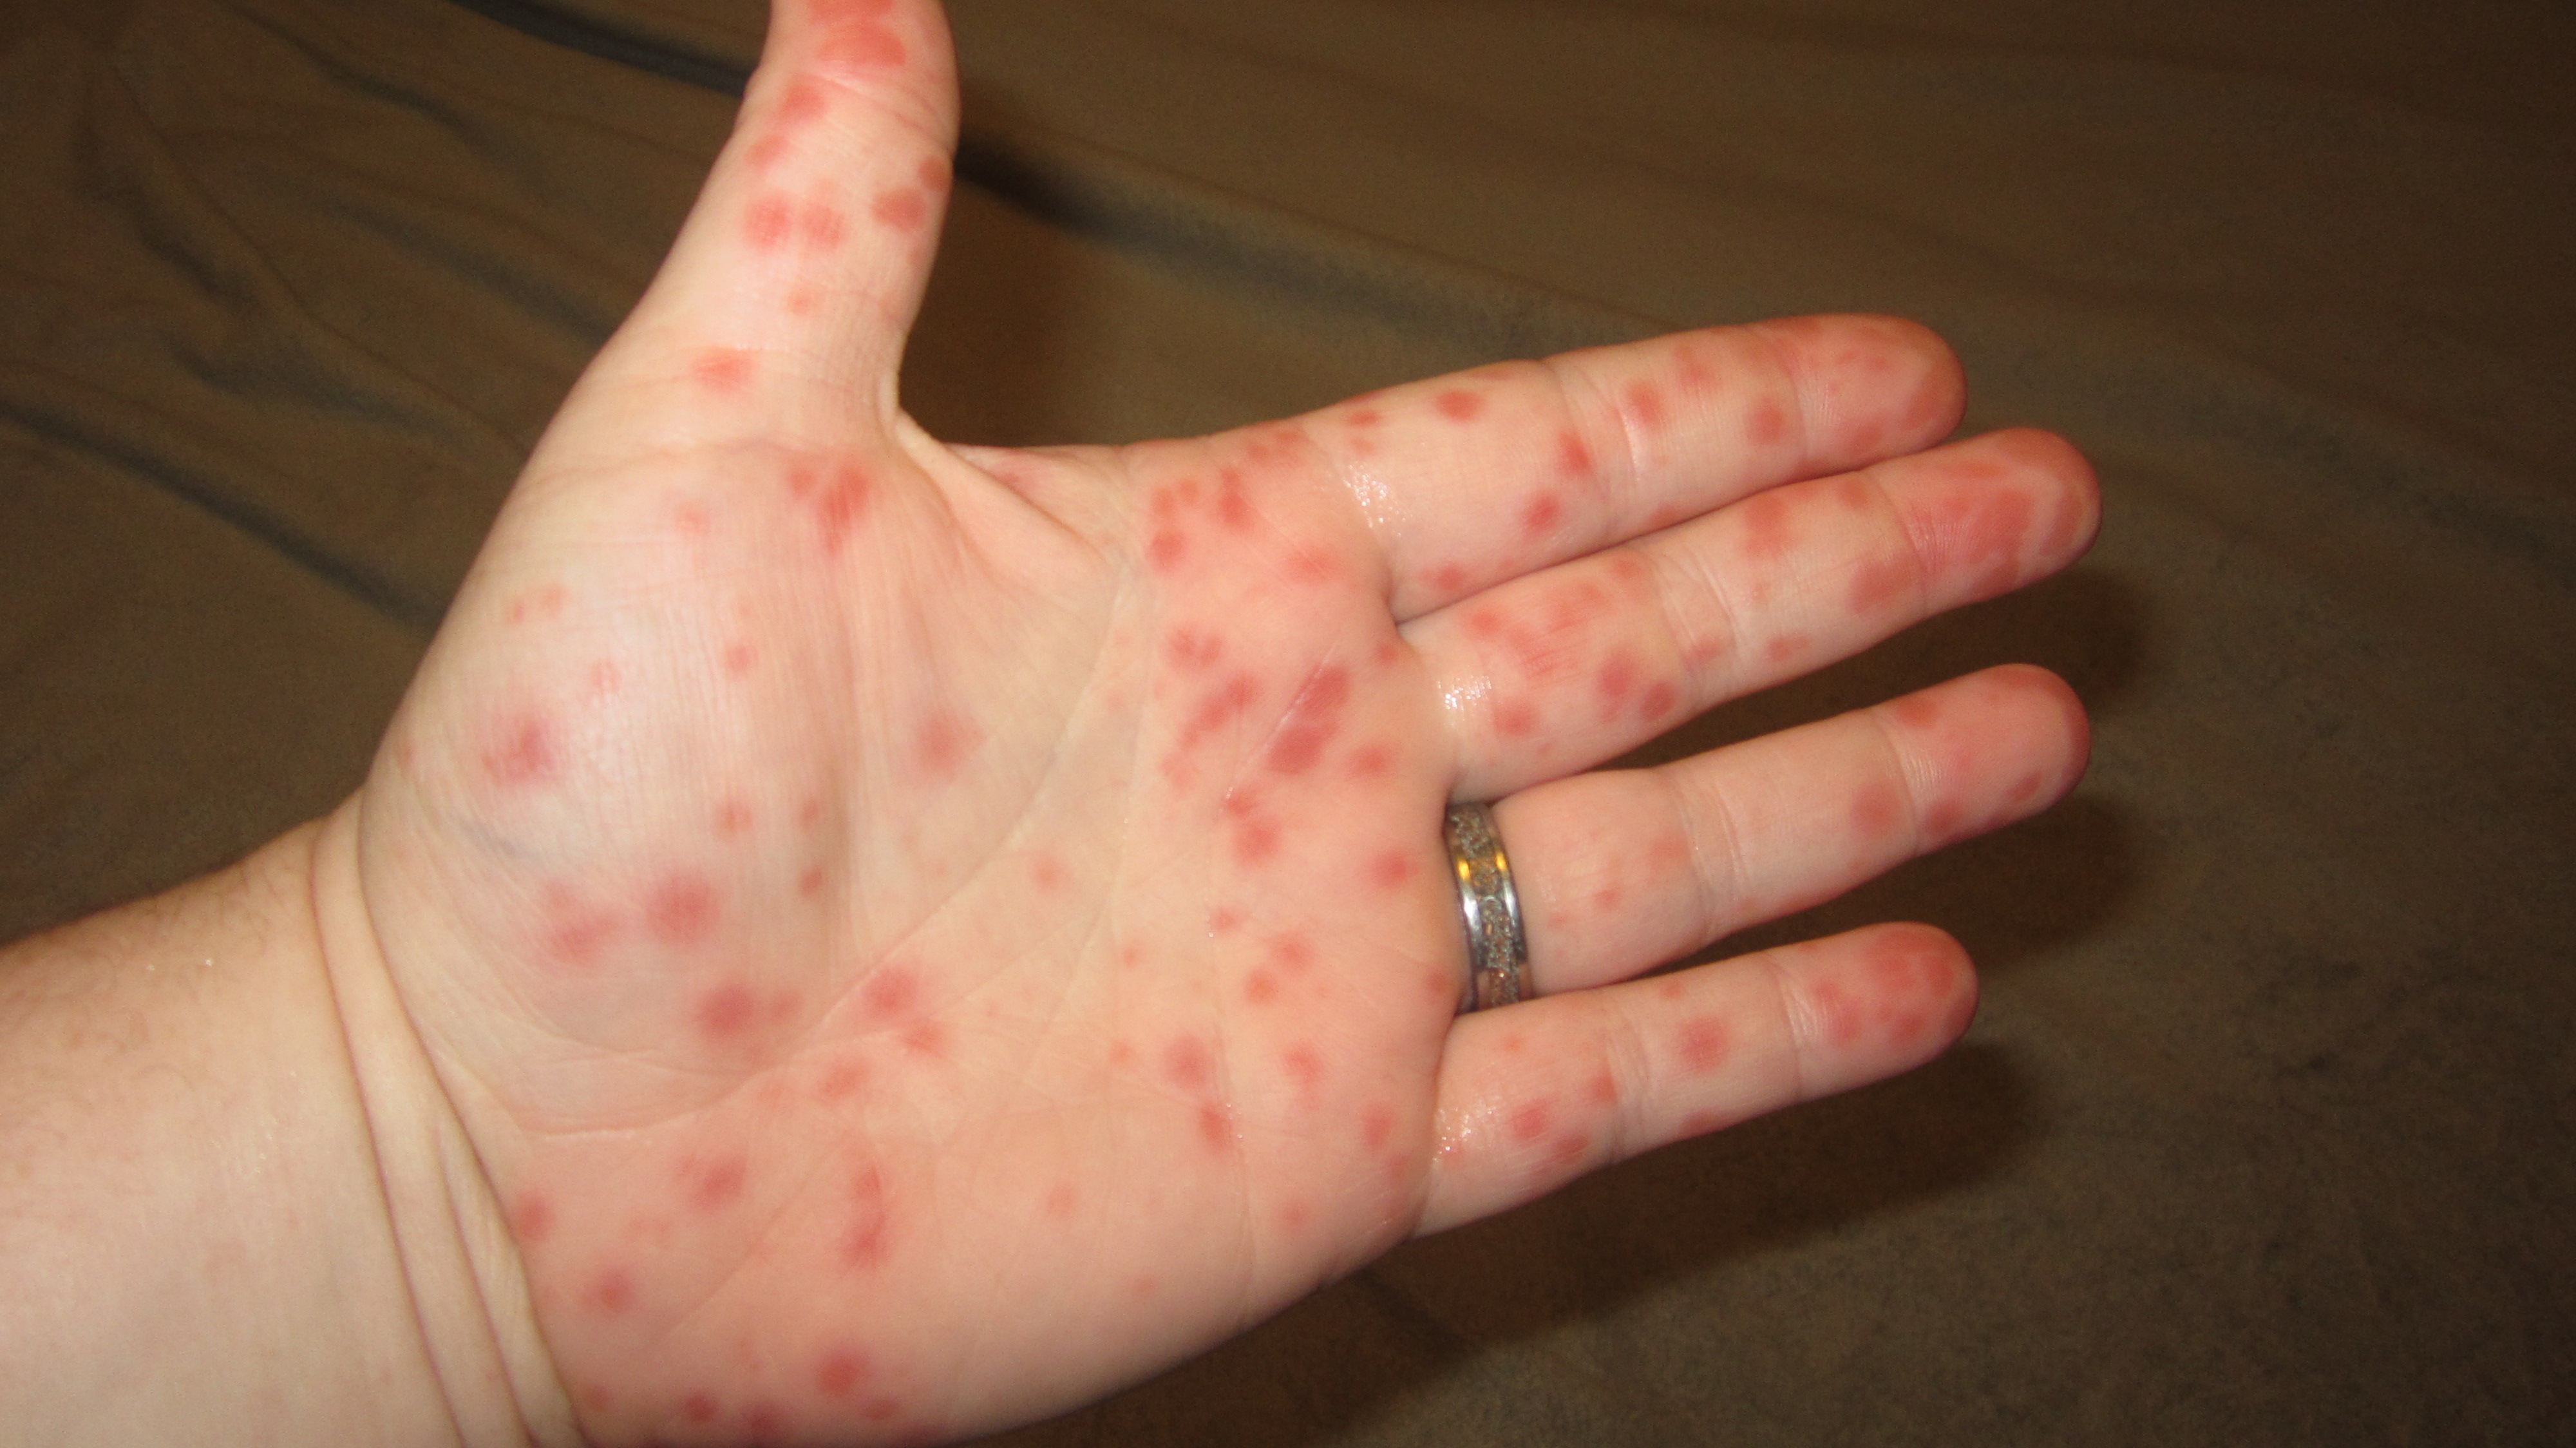 Hand, Foot and Mouth disease, Credit: Kessalia19, CC BY-SA 4.0 <https://creativecommons.org/licenses/by-sa/4.0>, via Wikimedia Commons